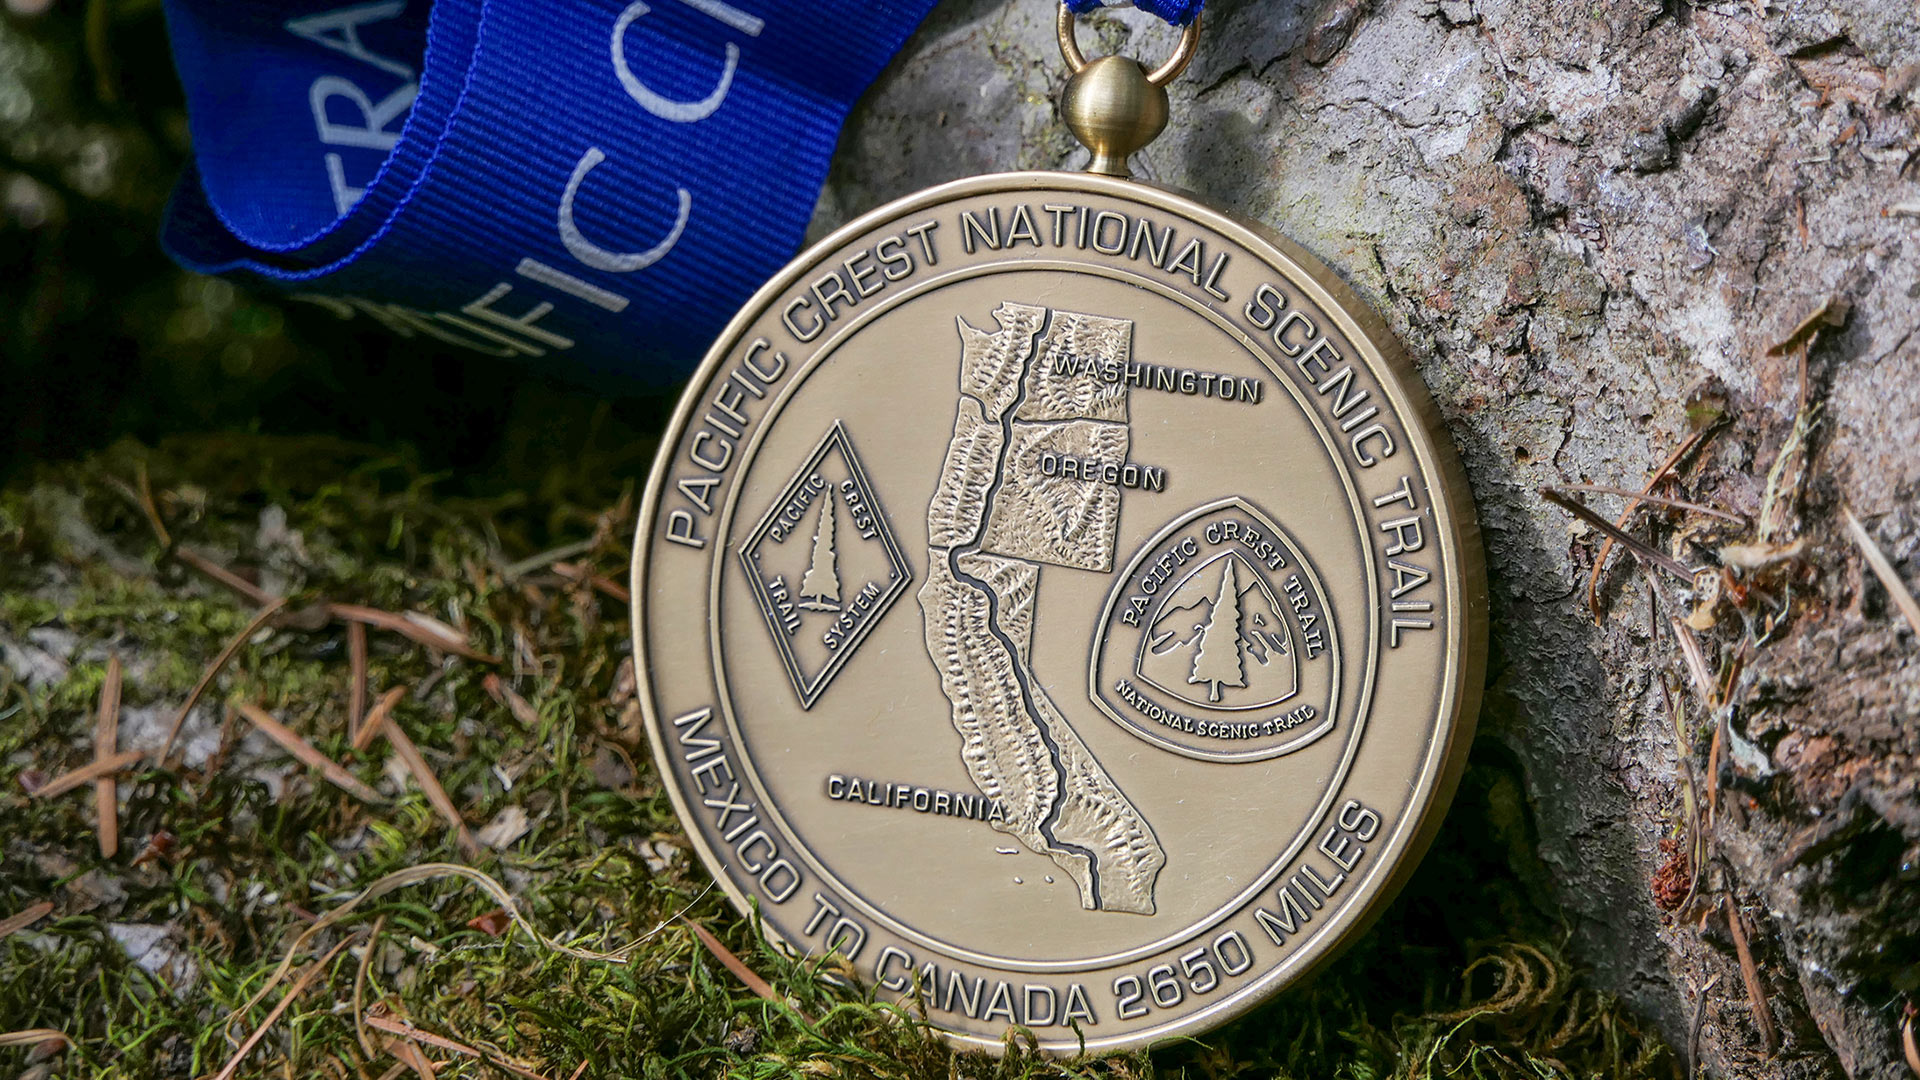 The PCT medal. Once you're a 2600 miler, you can get this beautiful PCT completion medal.